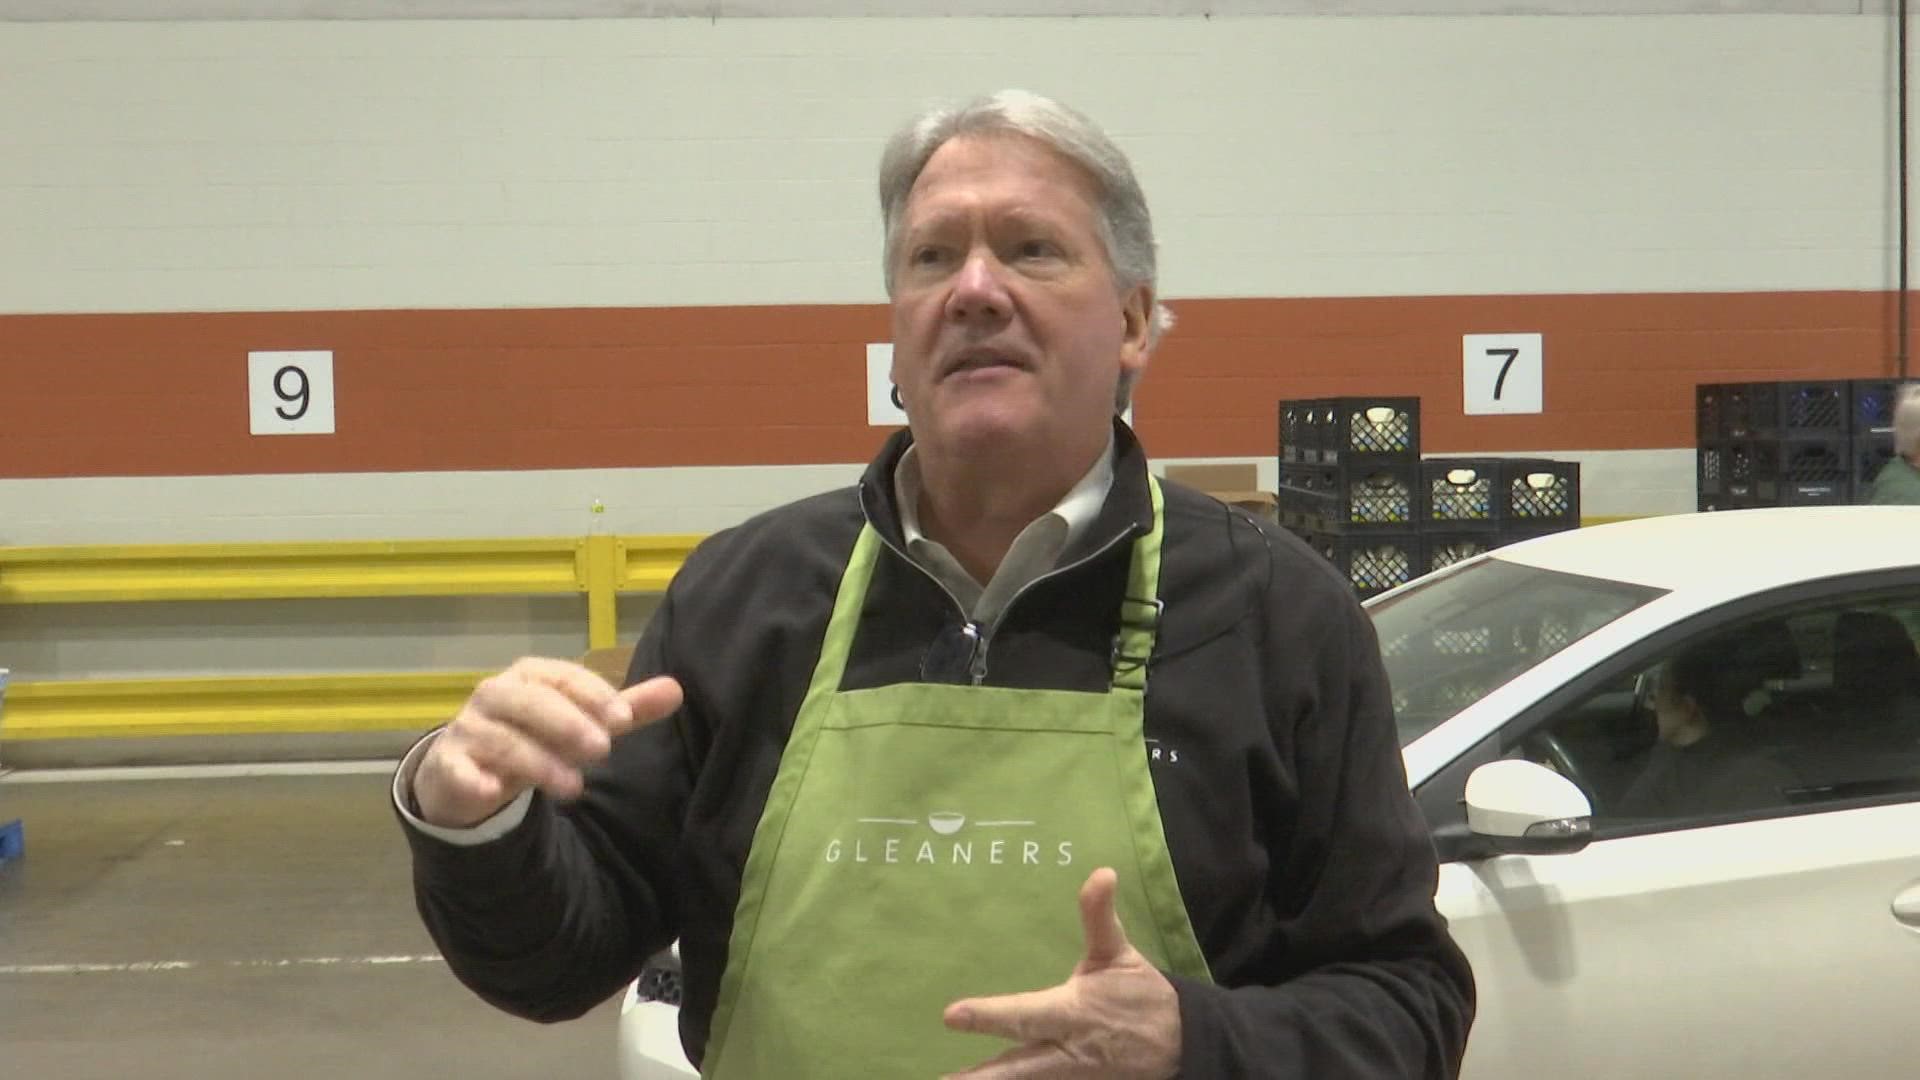 Rich Nye explains why Gleaners is switching to drive-thru service for now.